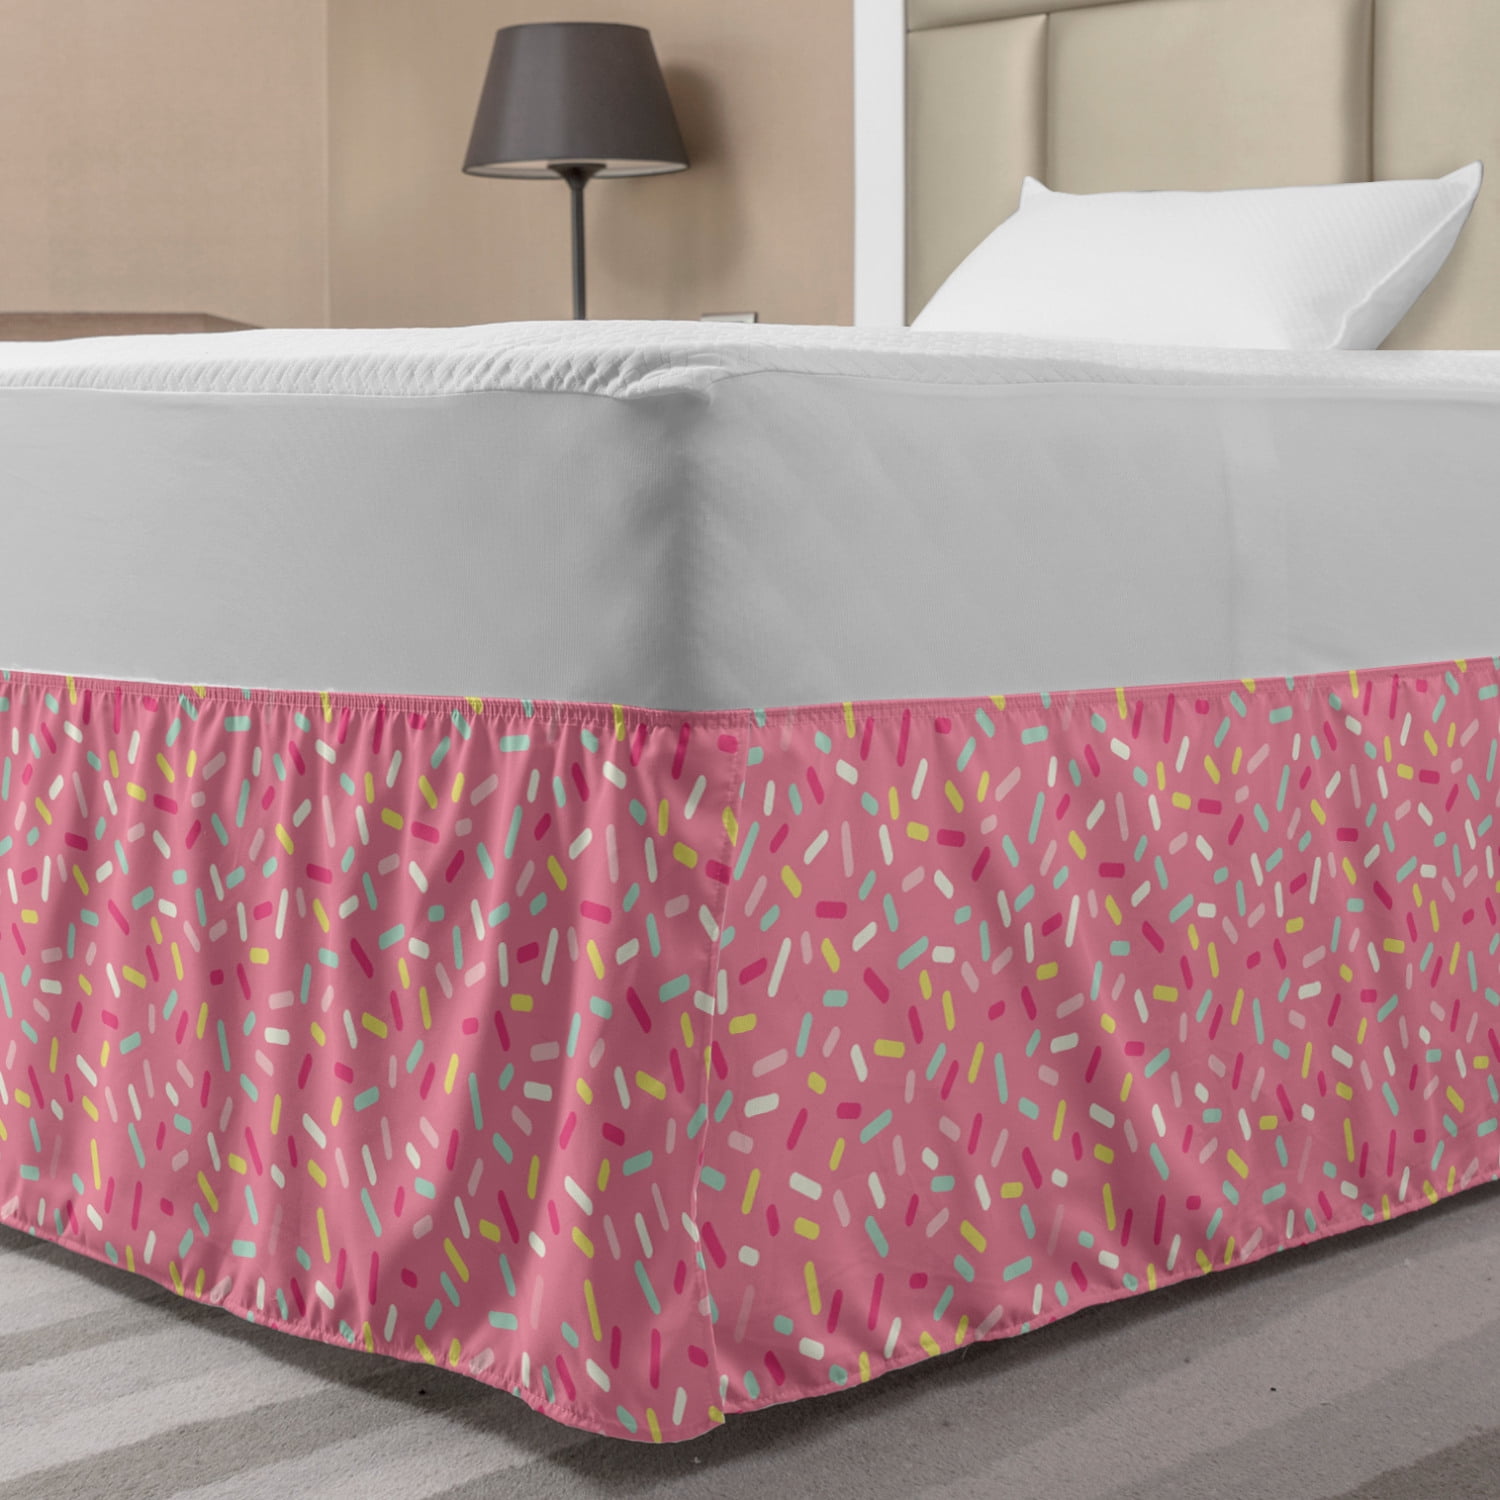 Twin Full Queen Novelty Printed Sheet Sets Colorful Sprinkled Yummy Donuts Sheet 